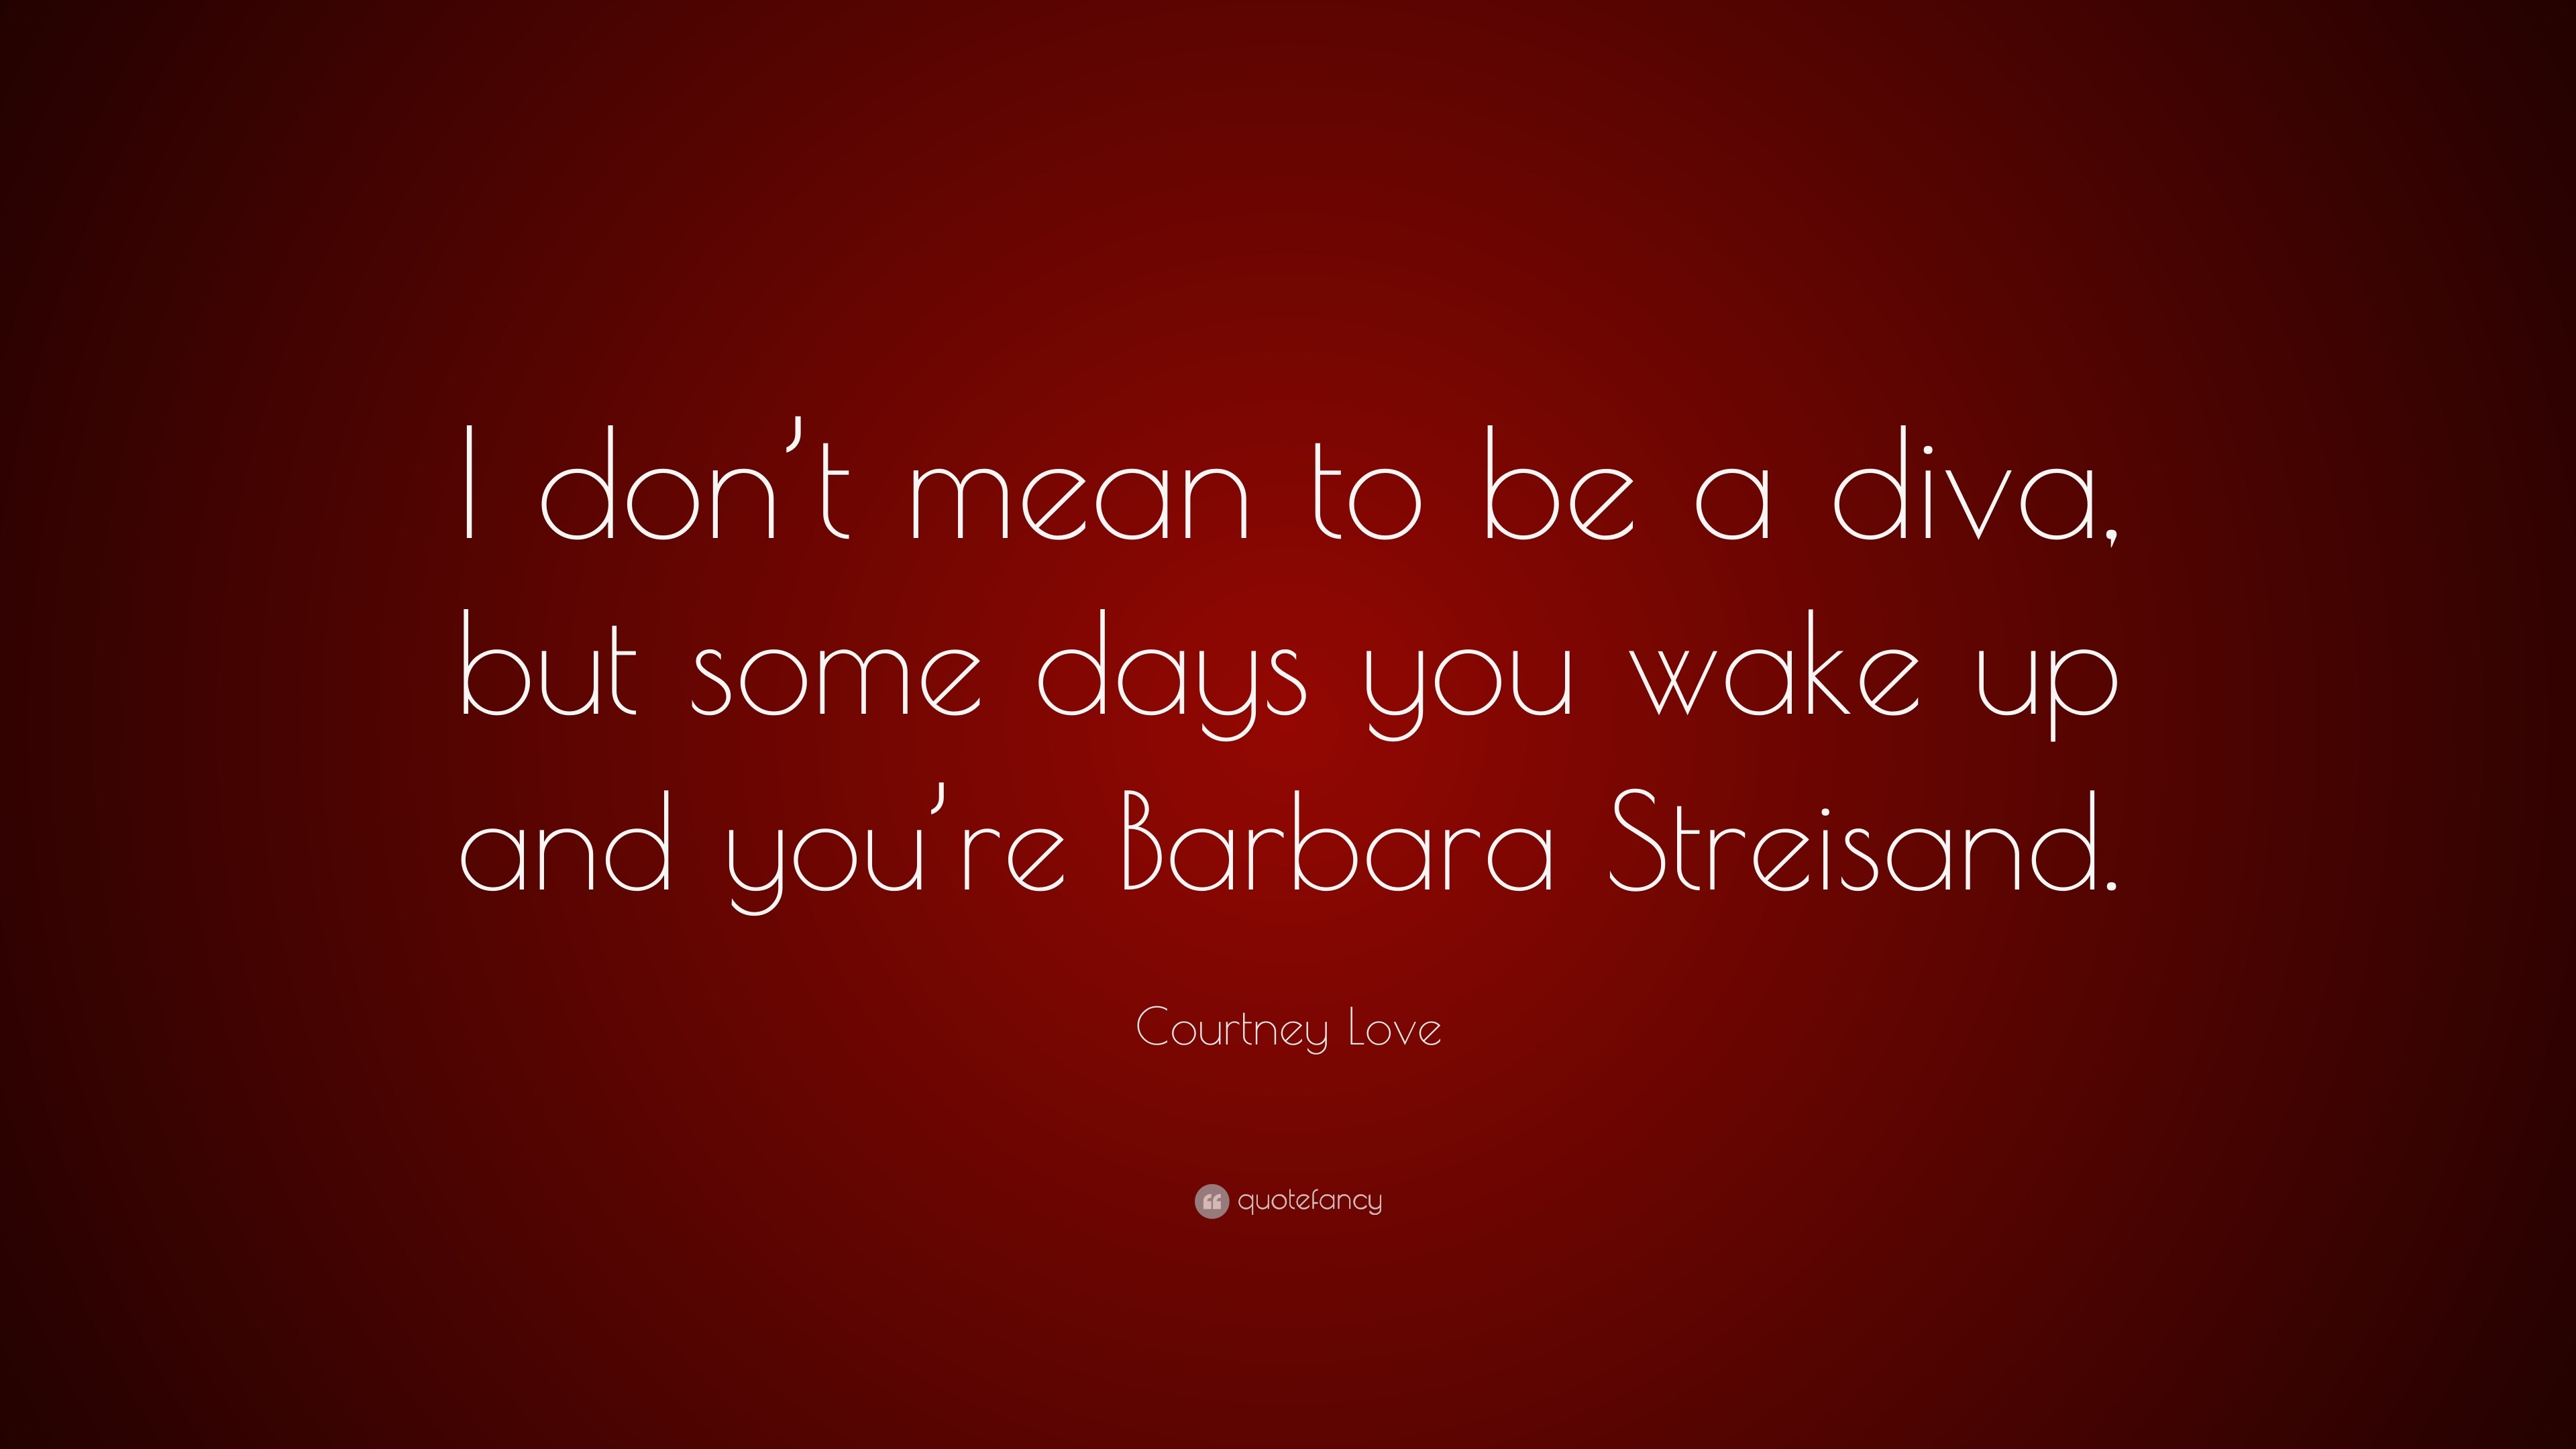 Love Quote: “I don't mean to be a diva, but some days you wake